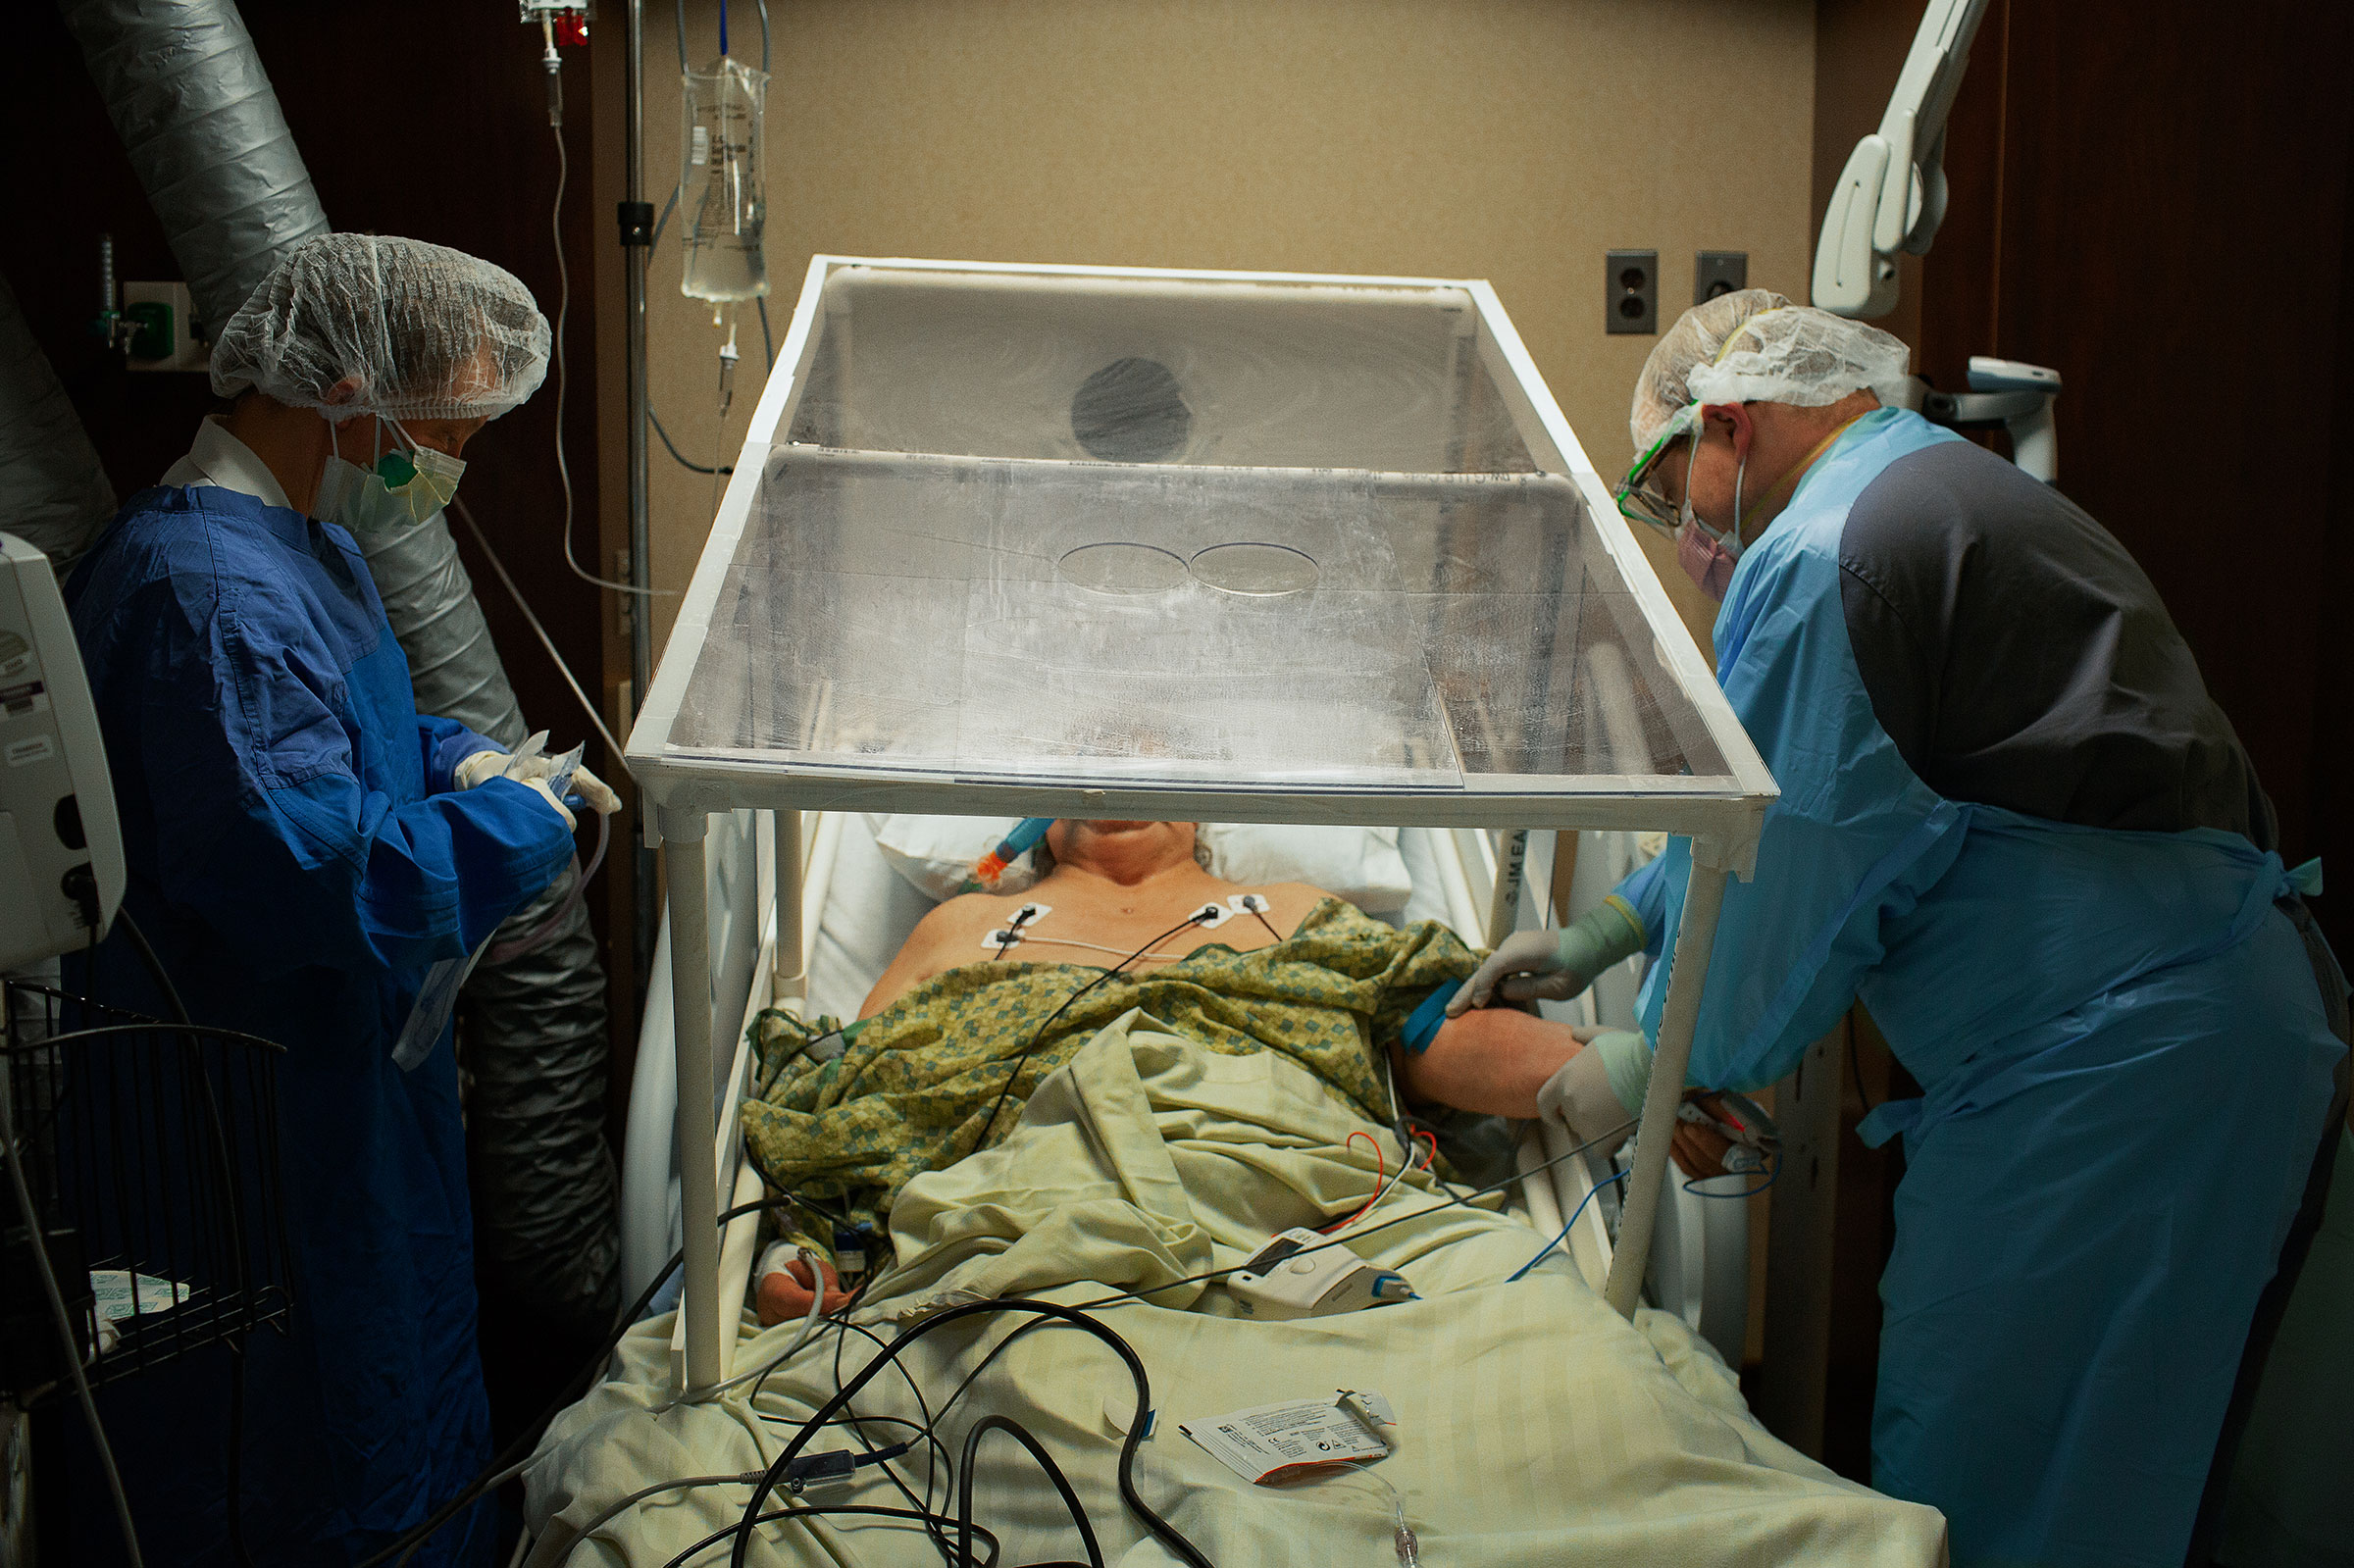 A COVID-19 patient is prepared for intubation by the anesthesiologist at Holy Name Medical Center in Teaneck, N.J., on March 31. The plastic tent is so the virus isn’t spread while transporting the patient between units. (Danny Kim for TIME)